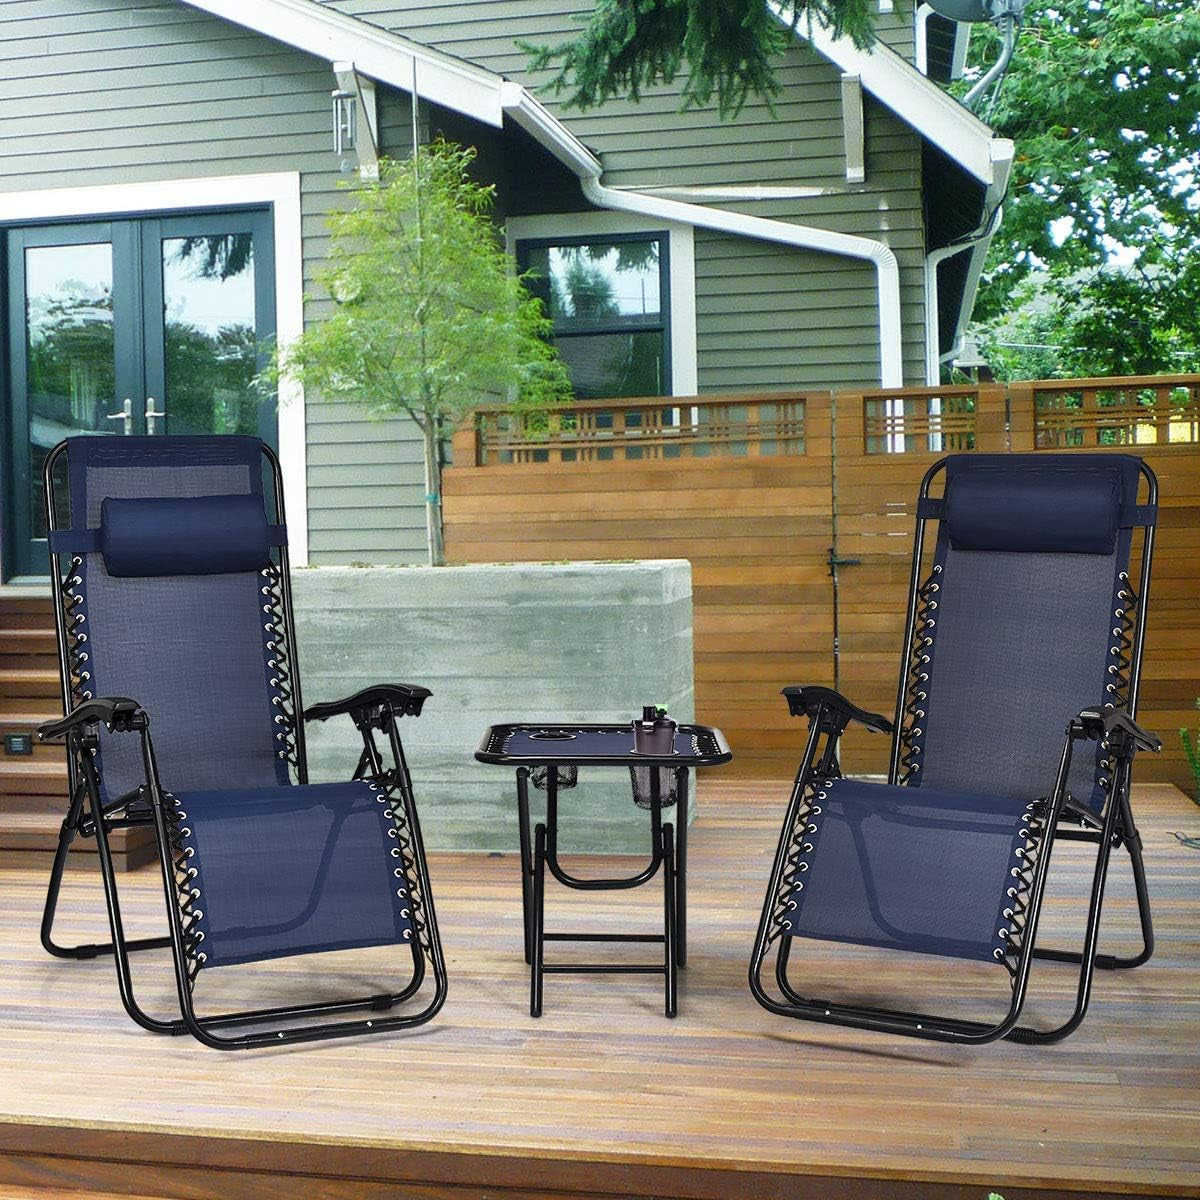 3 PCS Zero Gravity Chair Patio Chaise Lounge Chairs Outdoor Yard Pool Recliner Folding Lounge Table Chair Set (Navy)